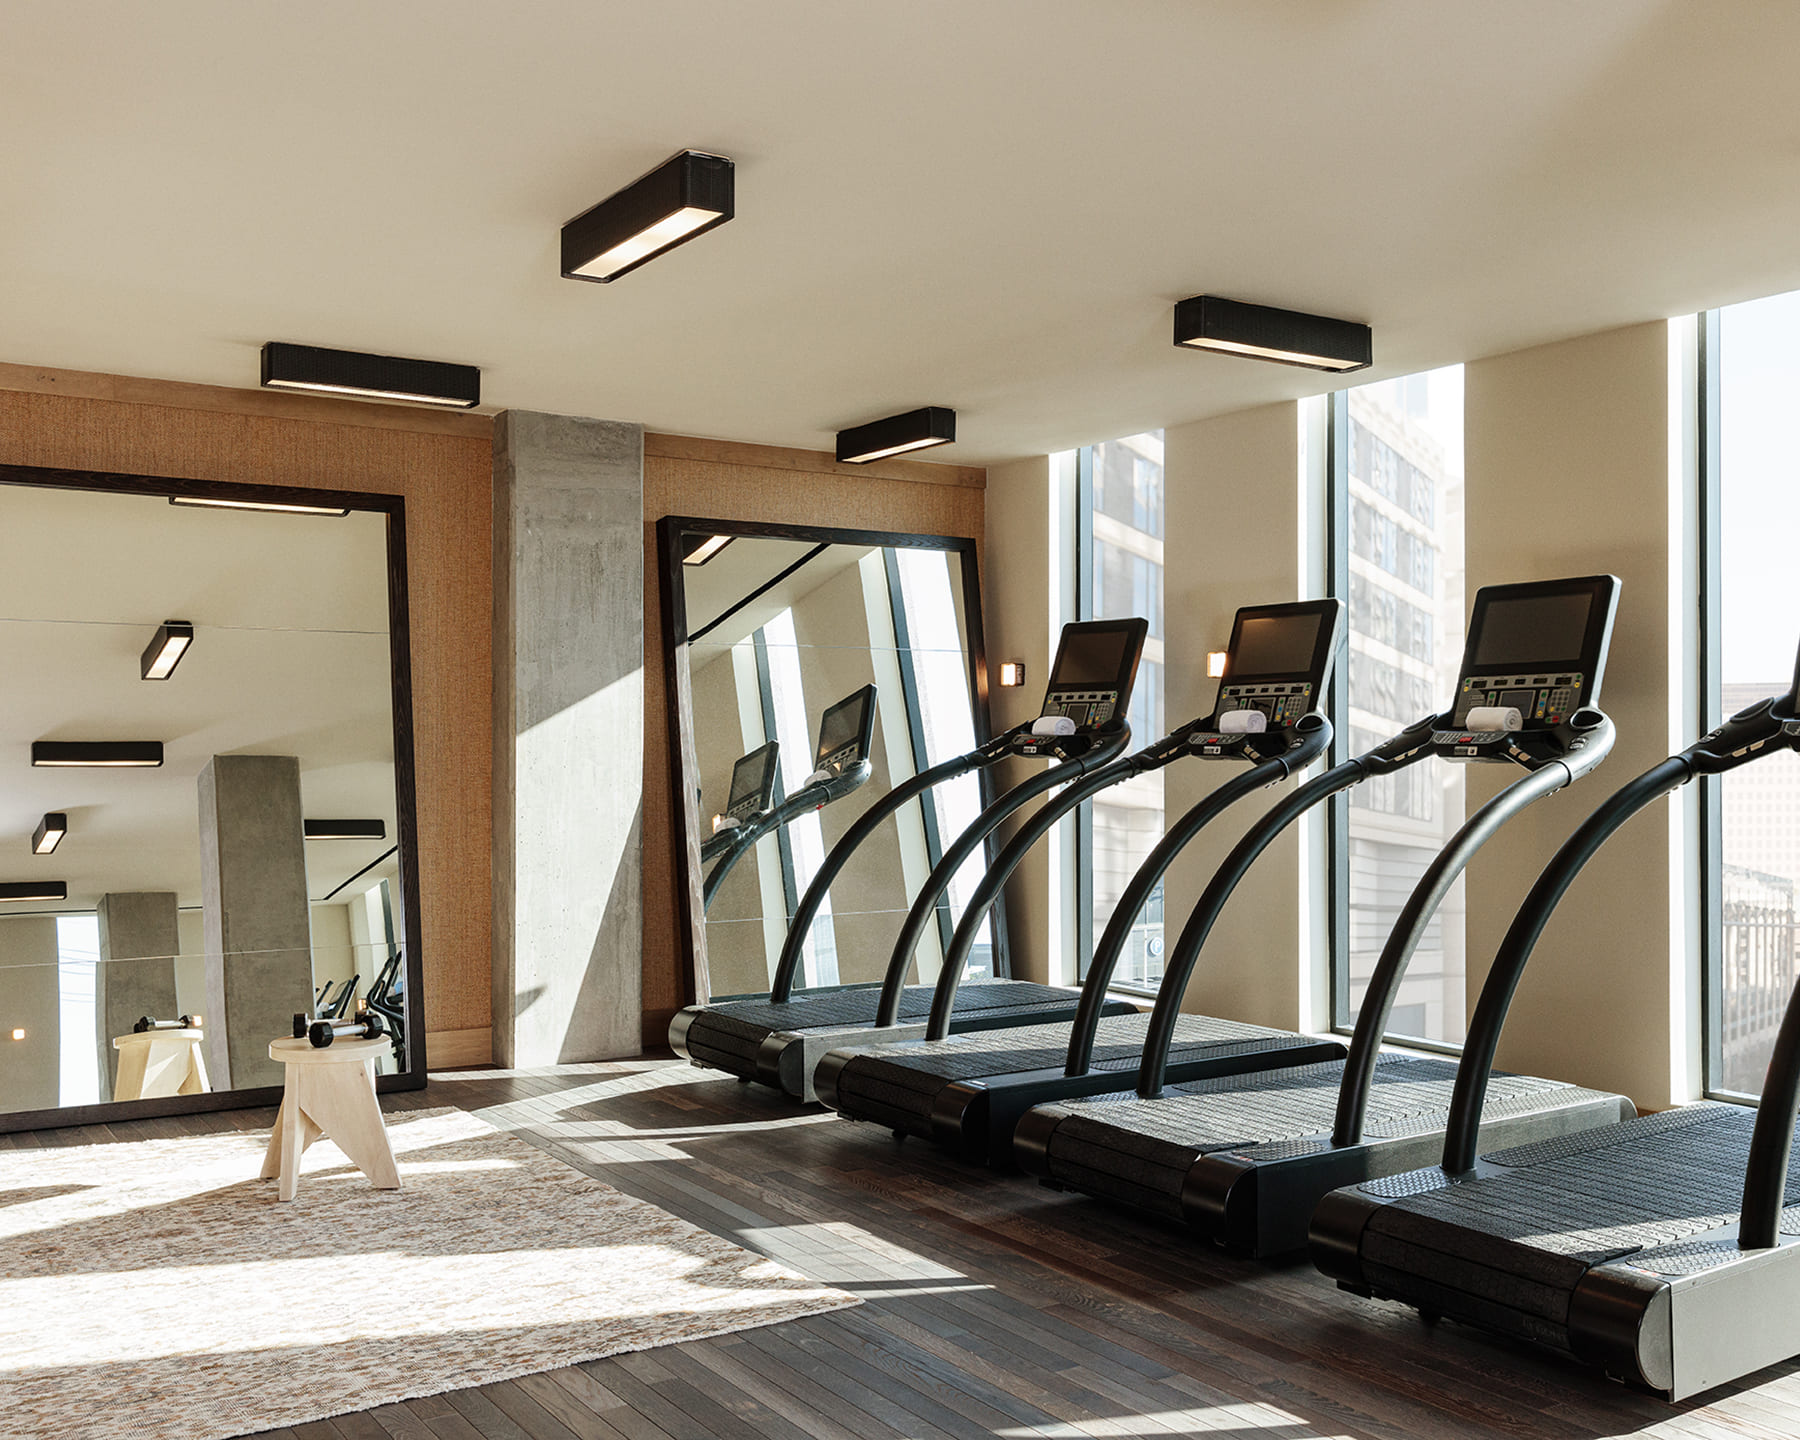 How your hotel can have an outdoor fitness center